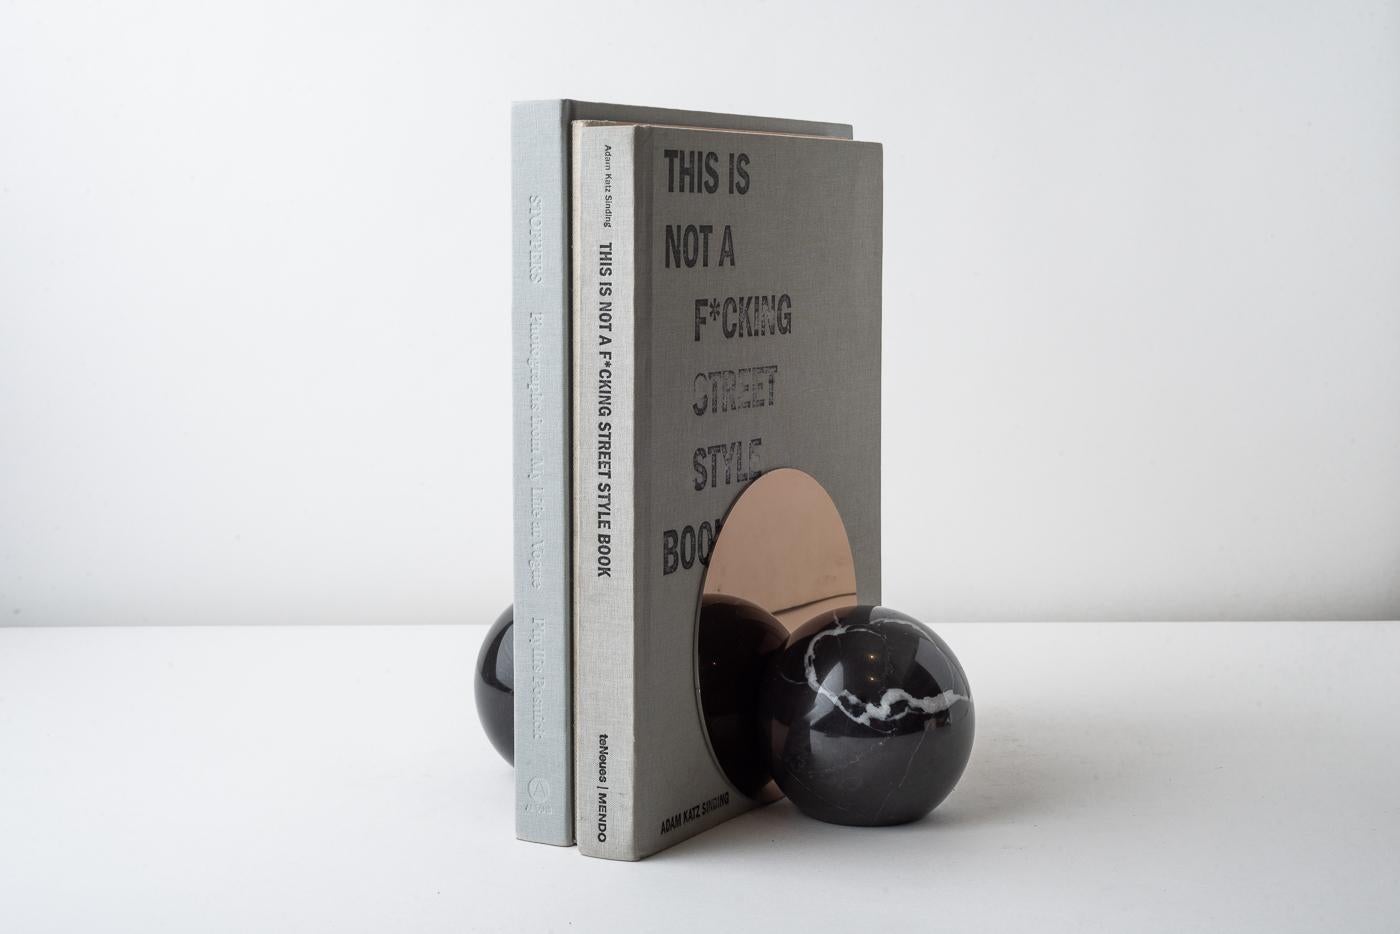 Introducing a truly luxurious addition to your personal library - a stunning pair of hand-carved marble bookends from the artisanal experts at bruci. These spherical bookends are exquisitely detailed with a vertical stainless steel plate boasting a